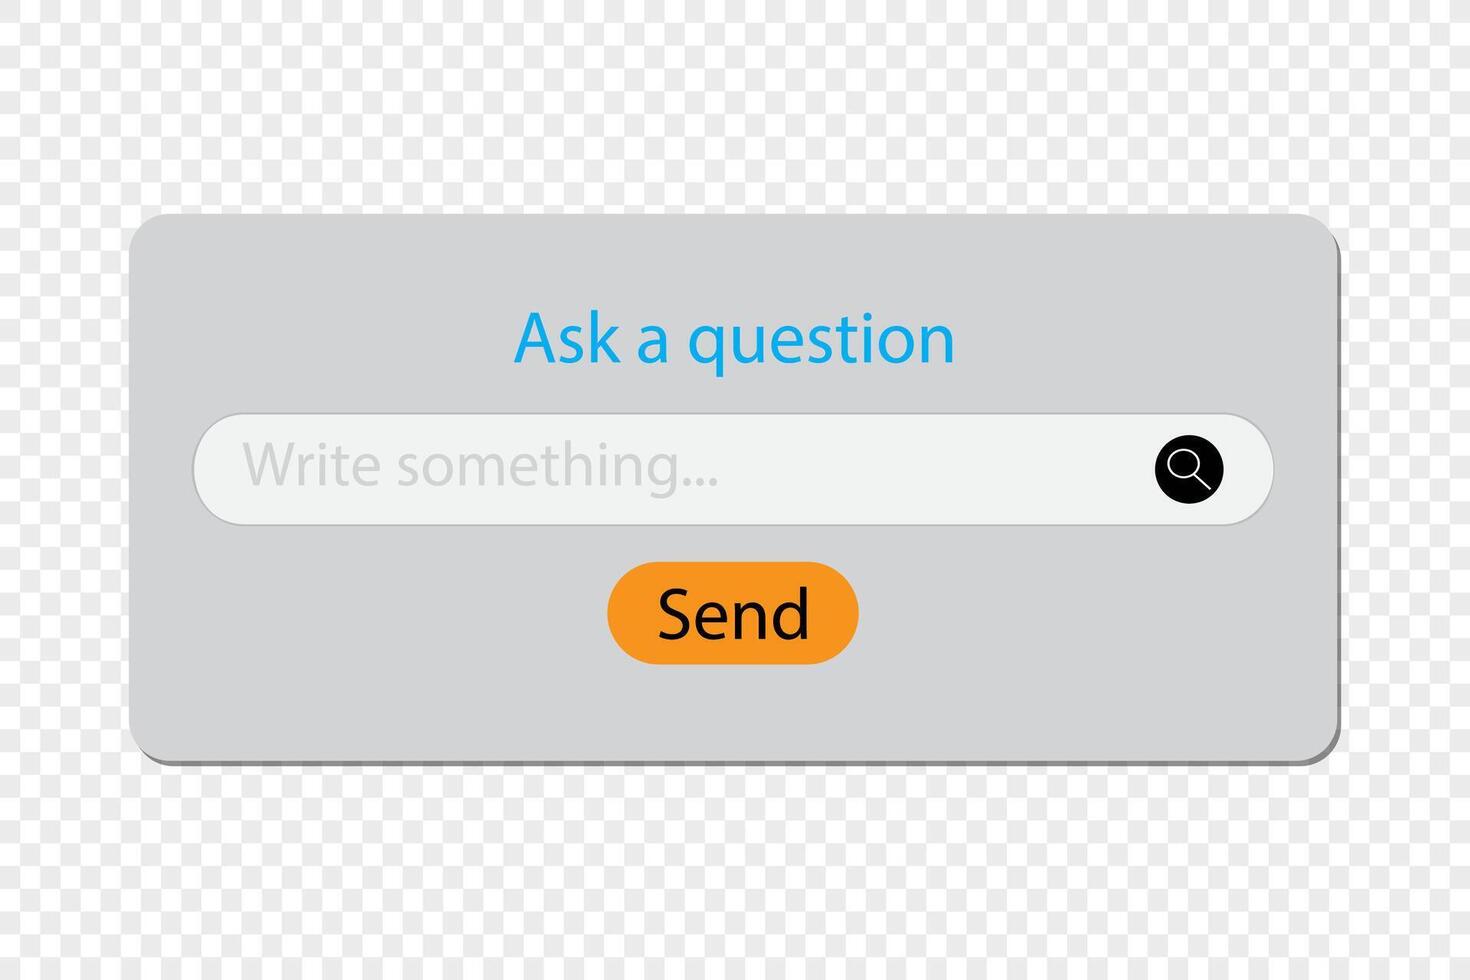 Ask a question search bar icon, Search here, Search bar for ui. Search bar vector icons in flat design.